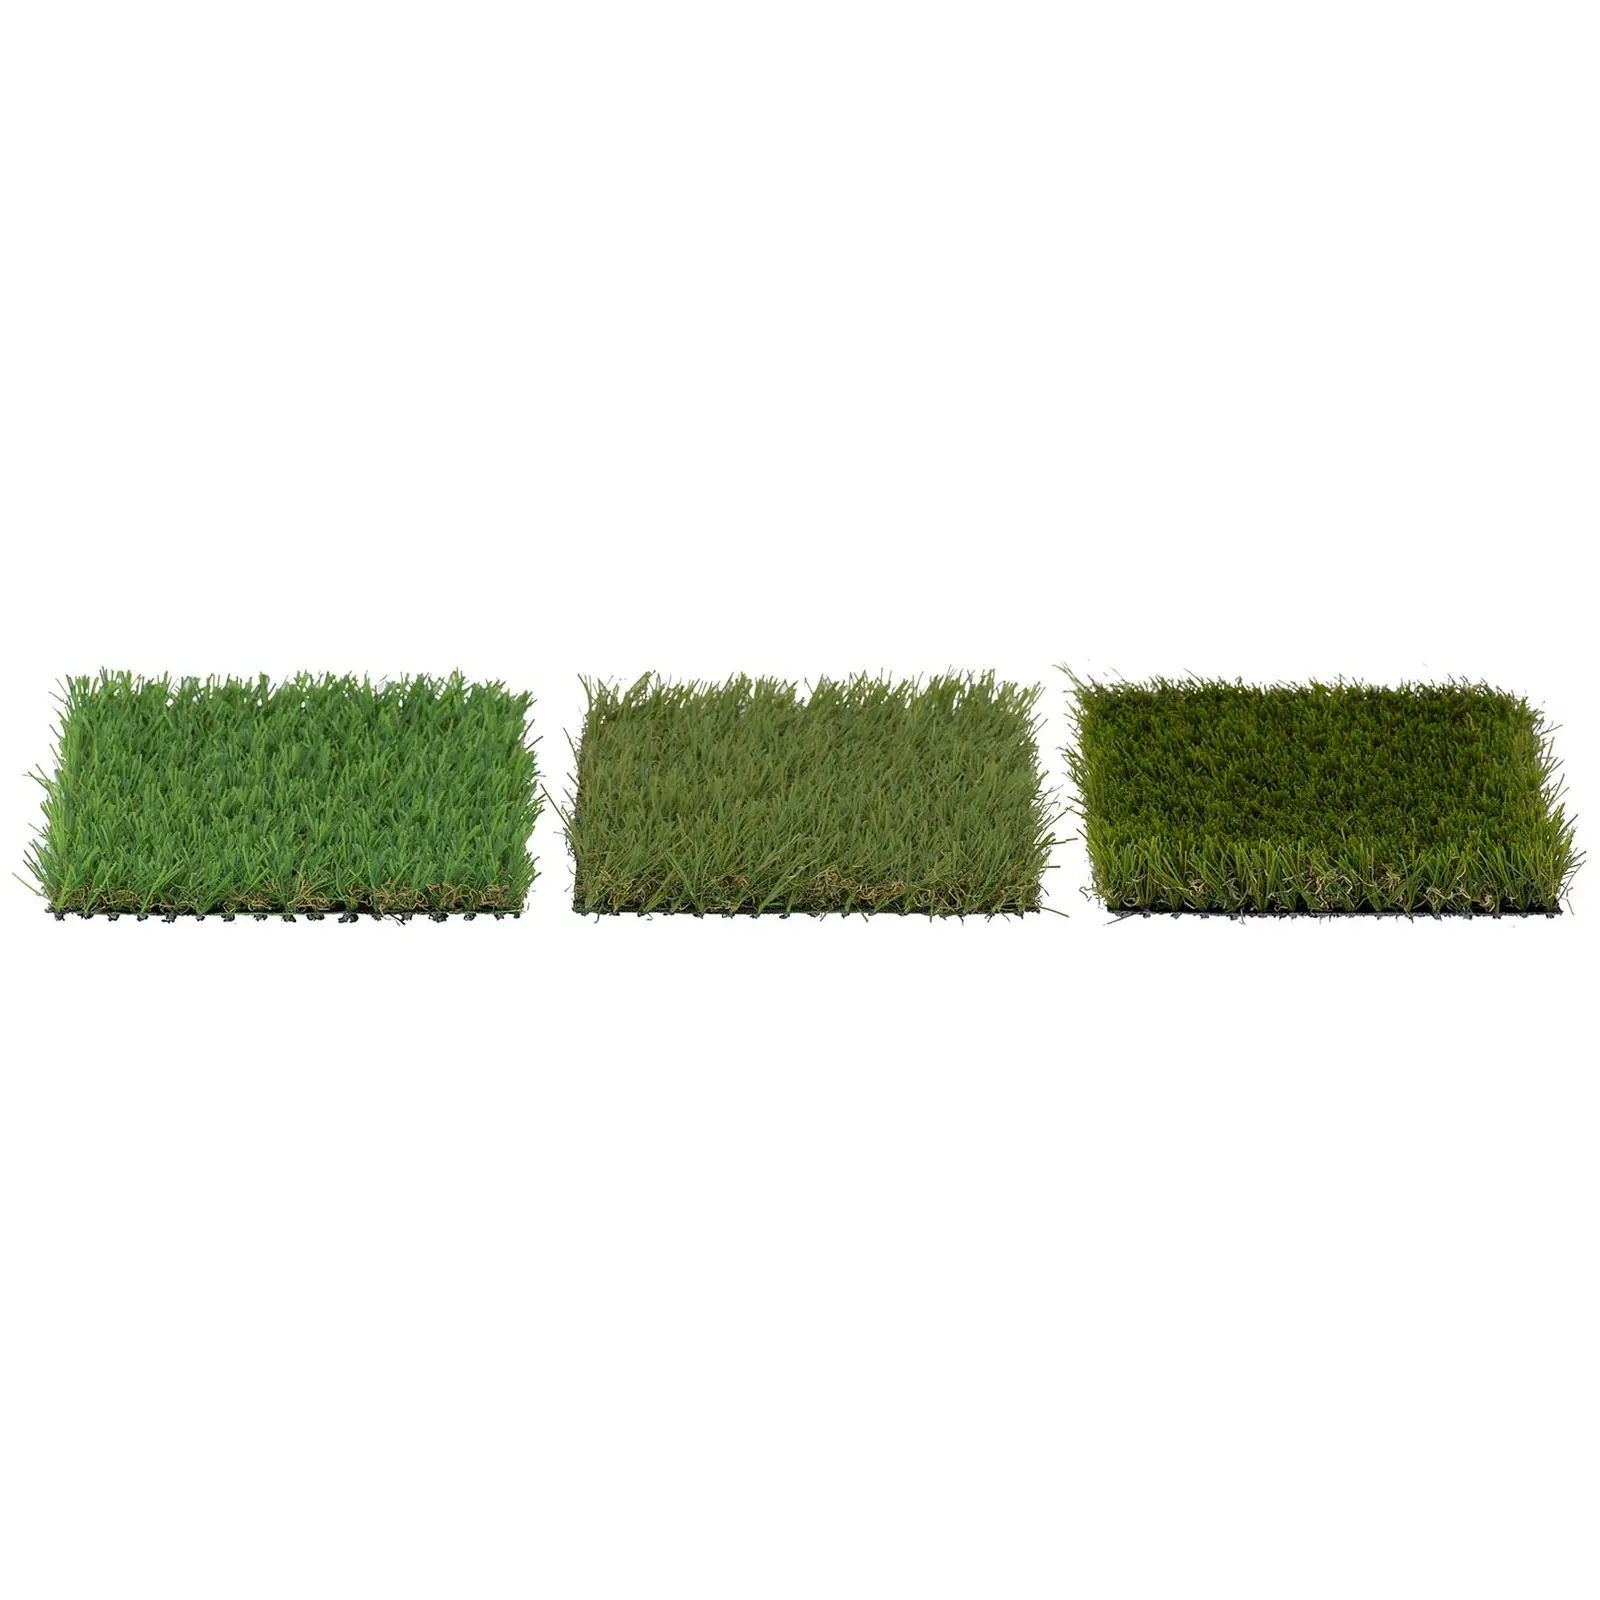 Artificial Grass - 3 samples - each 20 x 17 cm - height: 20-30 mm - stitch rate: 20/10 13/10 14/10 cm - UV-resistant